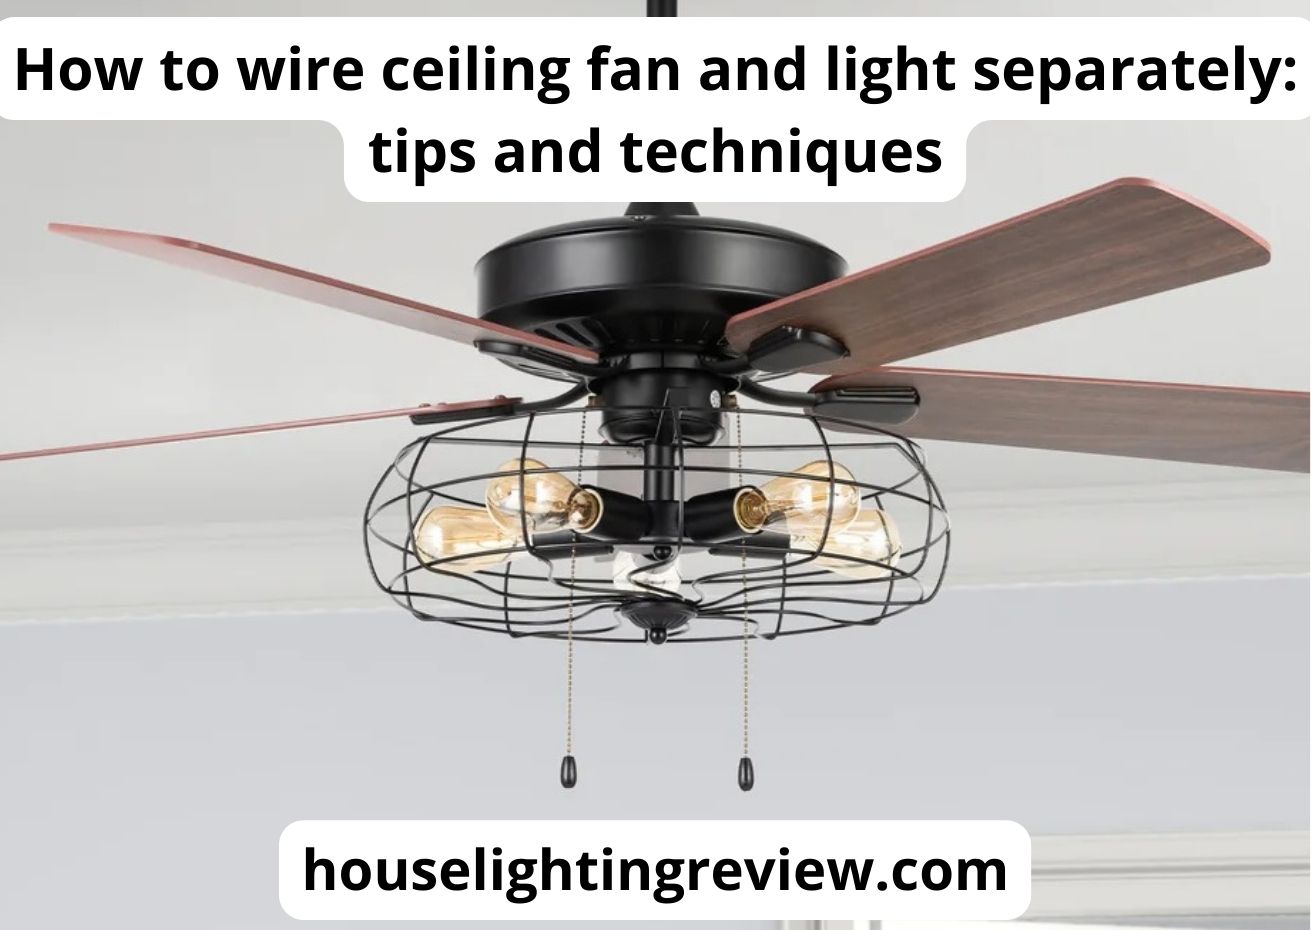 How to wire ceiling fan and light separately? The best techniques (2023)